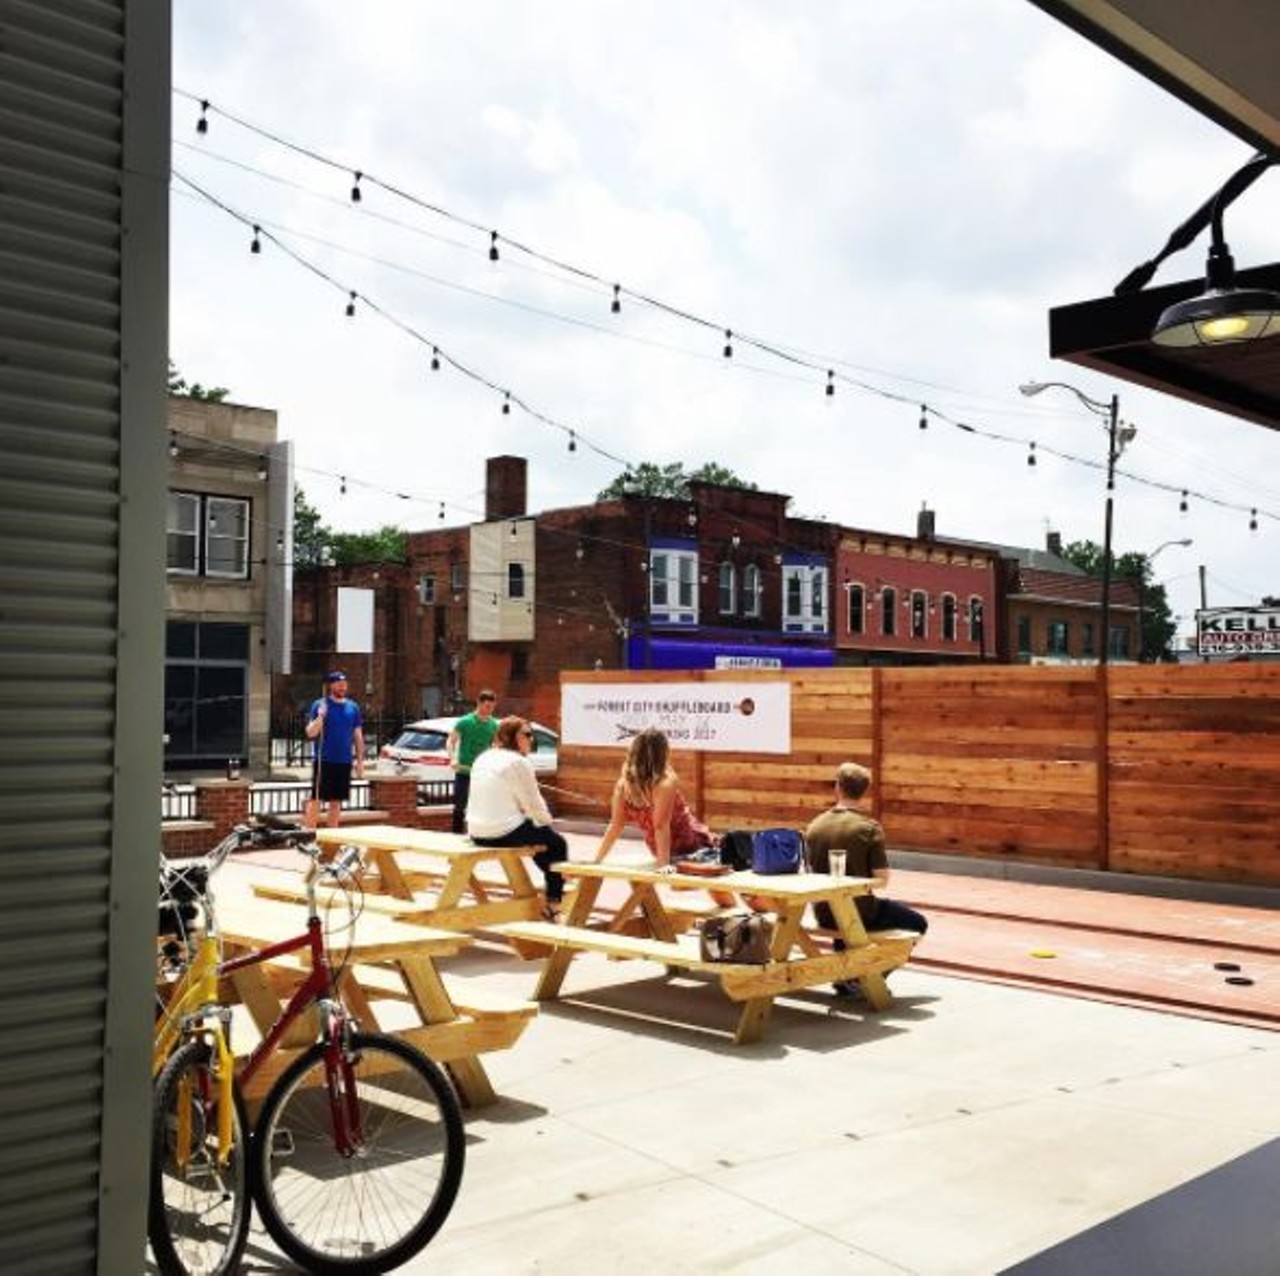  Forest City Shuffleboard
4506 Lorain Ave., Cleveland
Like many bars in the Ohio City area, this joint boasts a patio perfect for enjoying upcoming summer meals. But unlike most other bars in the city, you can play shuffleboard while enjoying your food and drinks.
Photo via @forestcityshuffle/Instagram